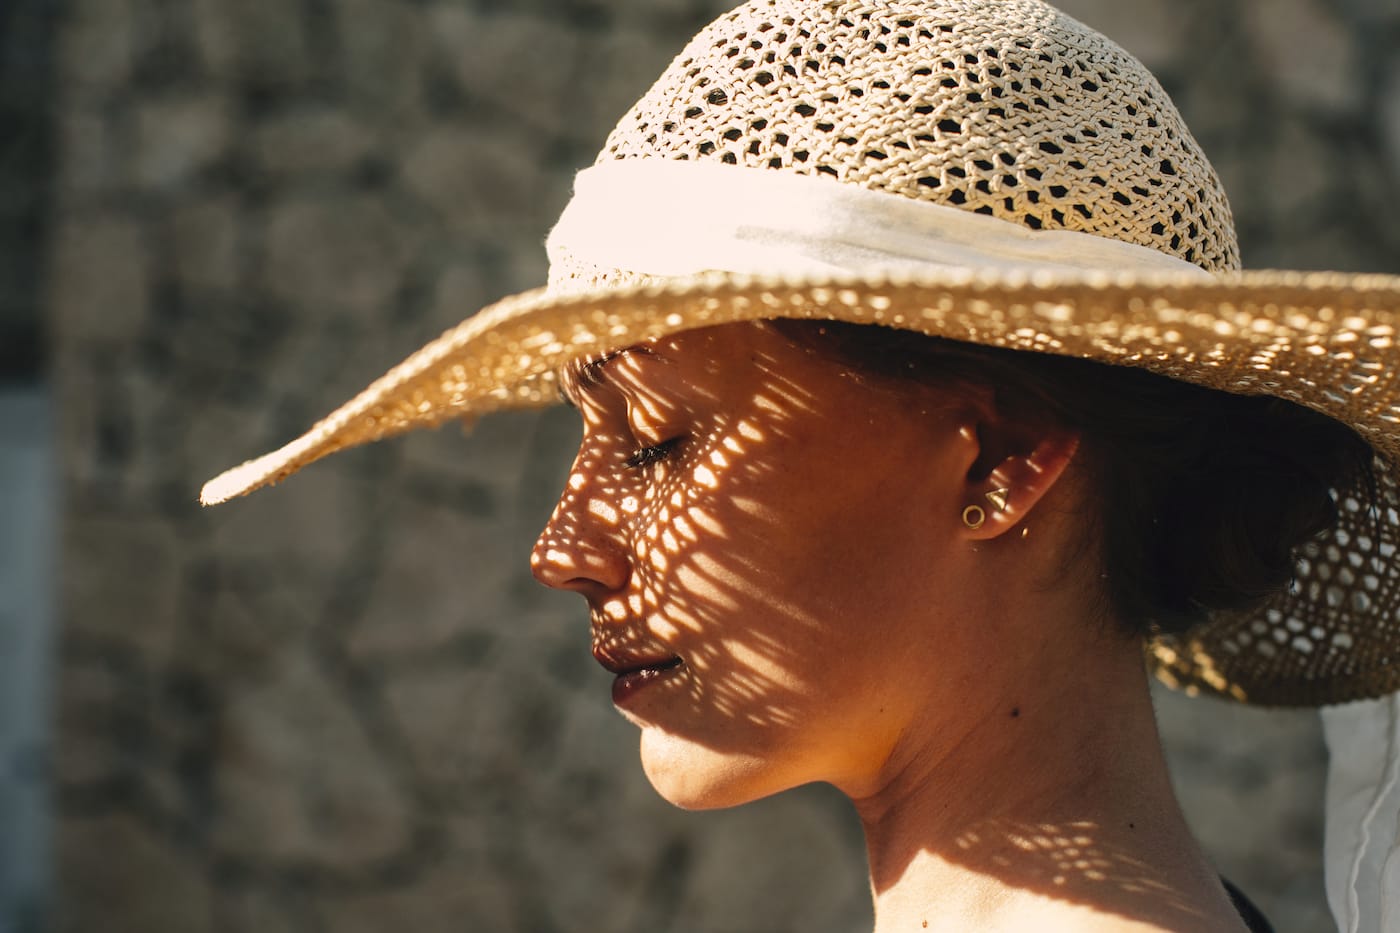 These 6 Spots Are the Most Vulnerable for Long-Term Sun Damage